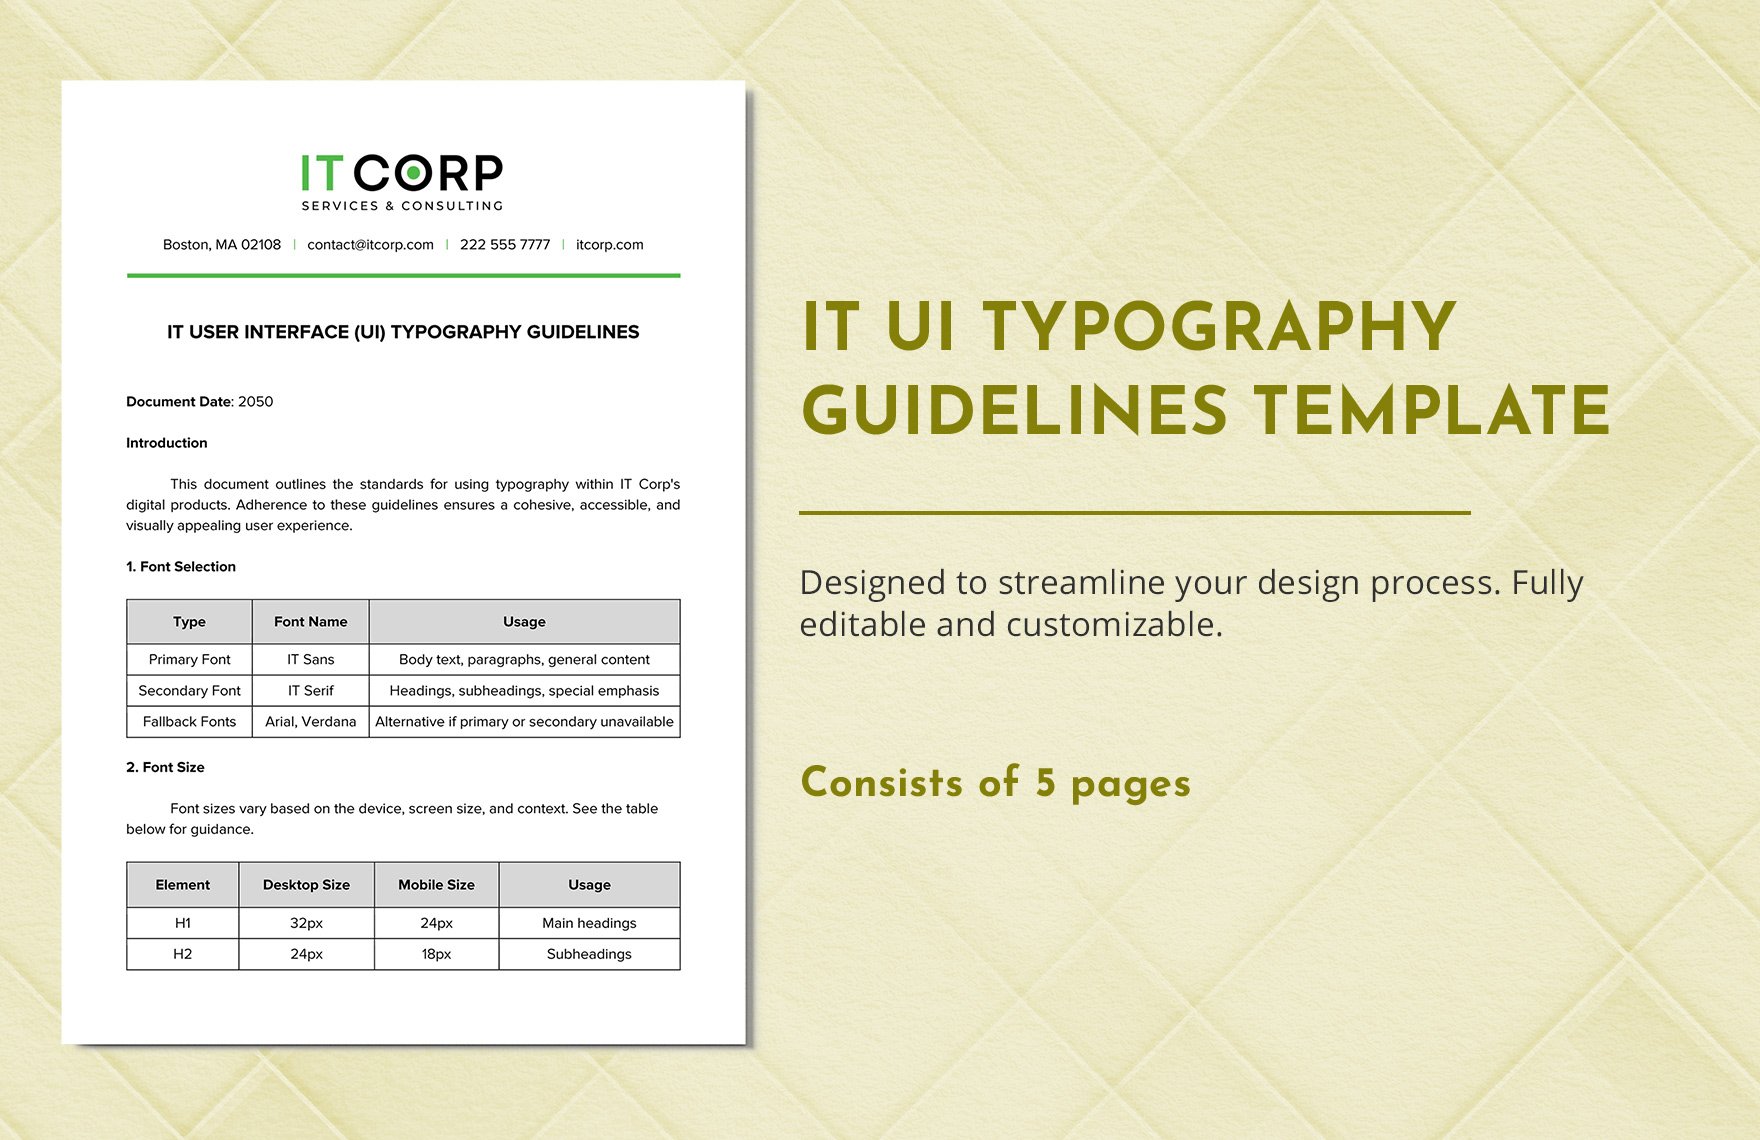 IT UI Typography Guidelines Template in Word, Google Docs, PDF